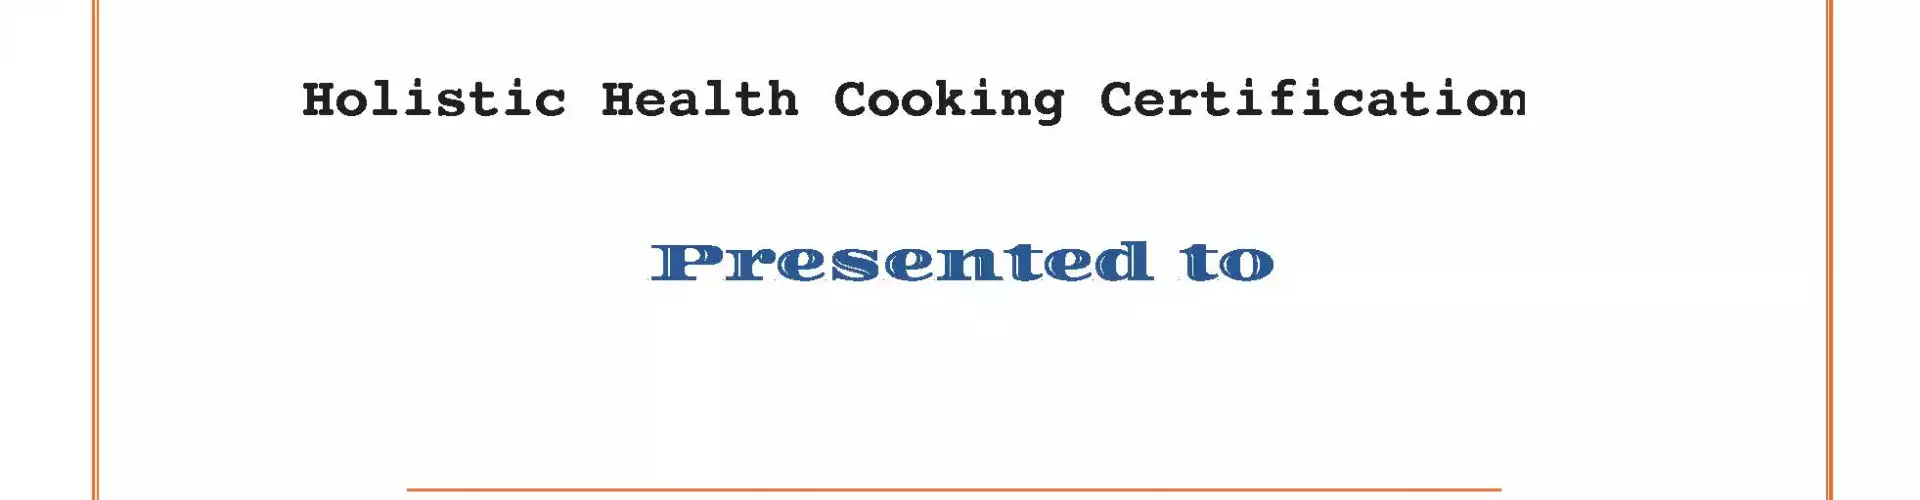 Holistic Health Cooking Certification